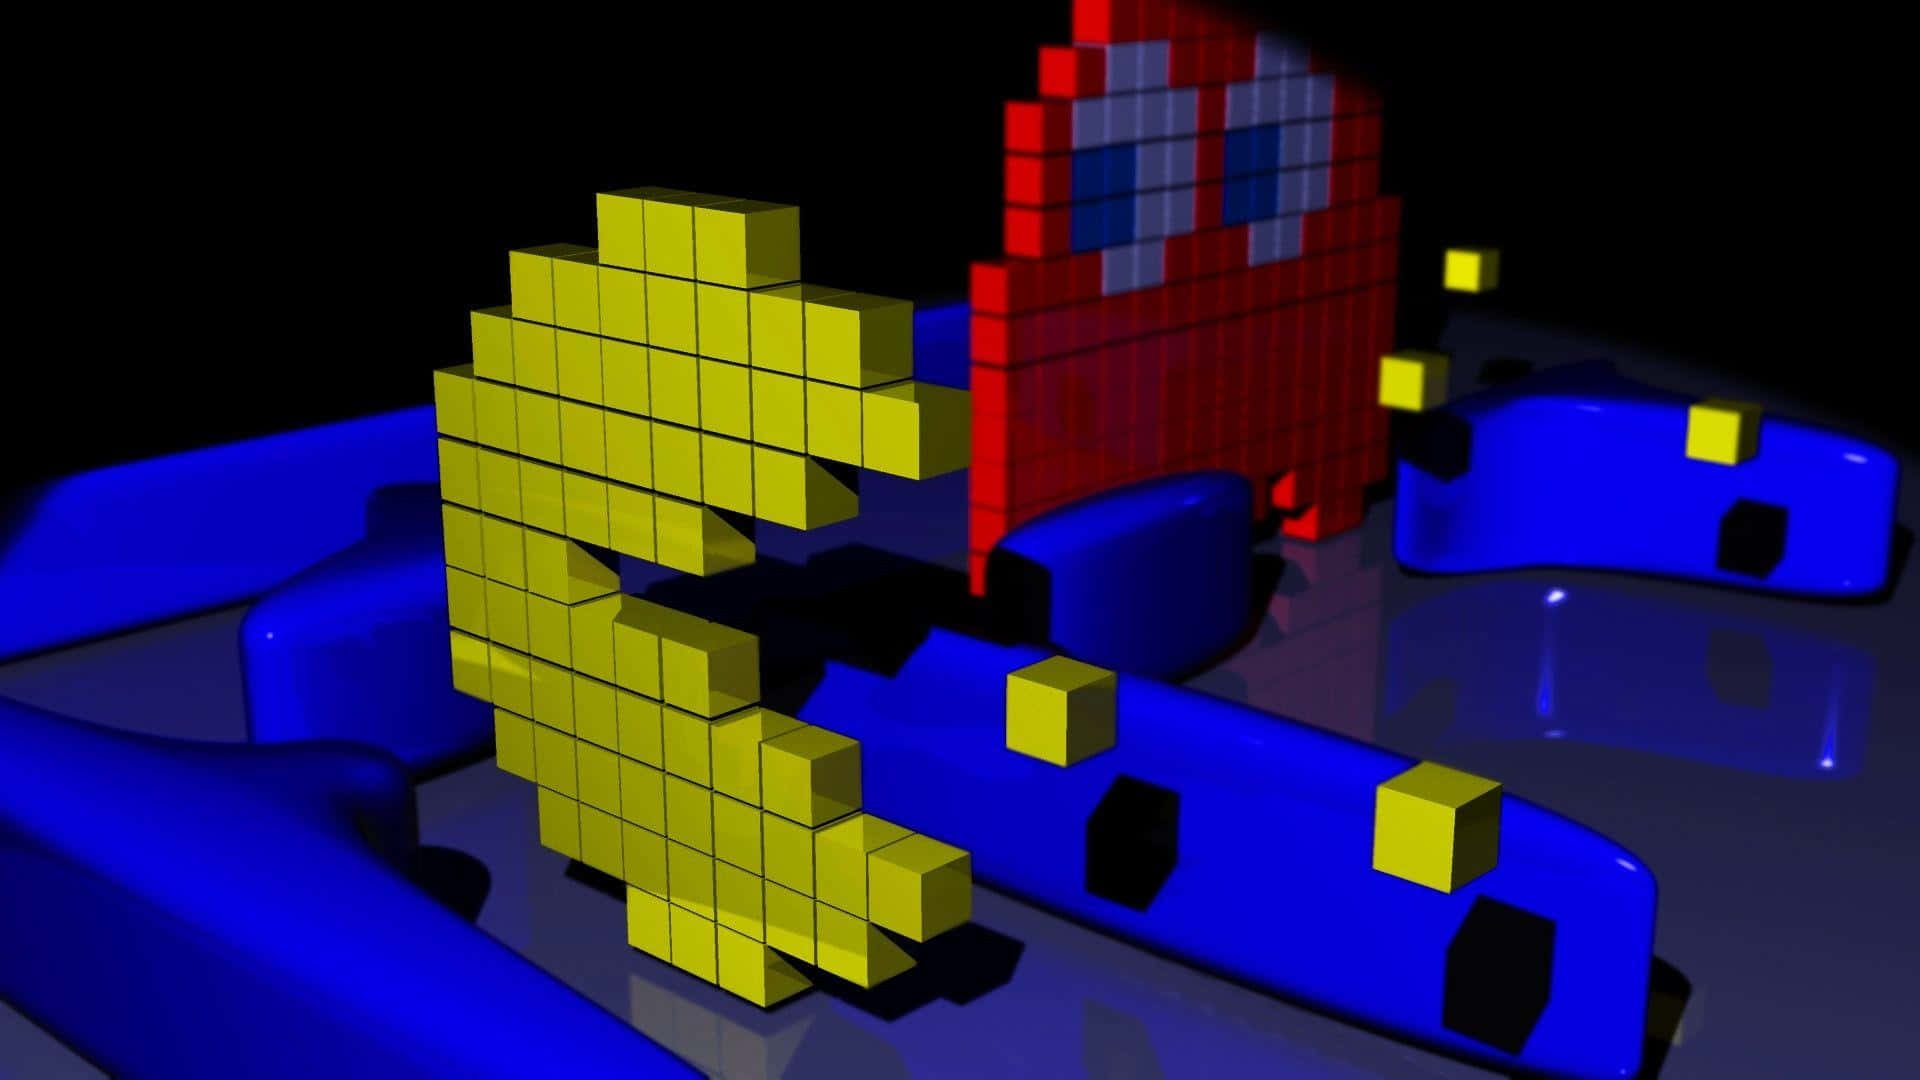 A Blue And Yellow Pixelated Image Of A Pac Man Game